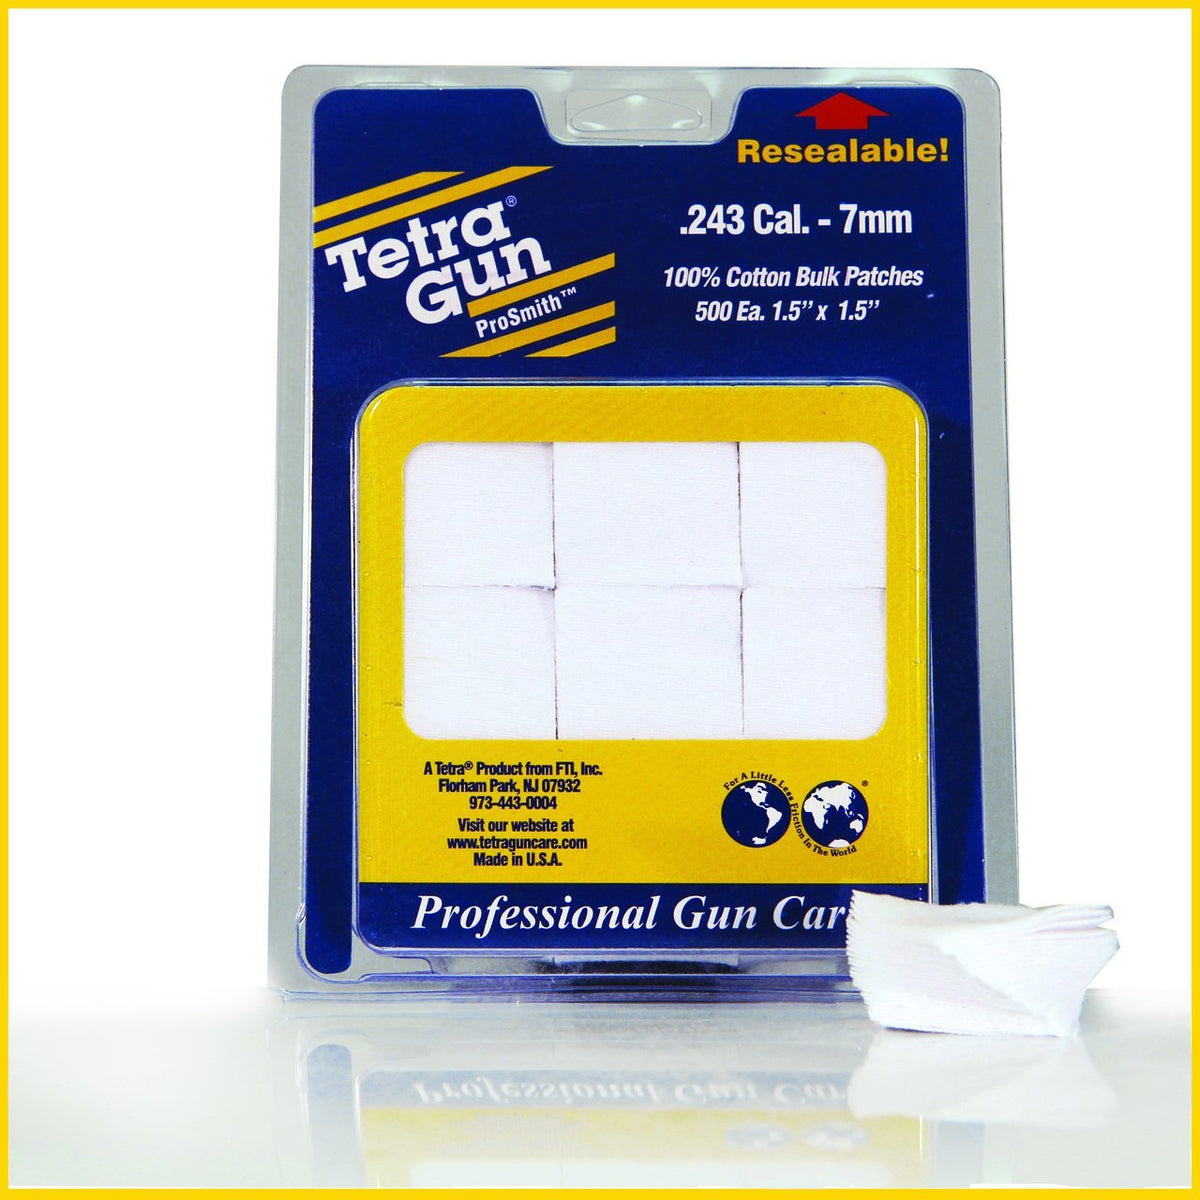 Tetra Gun .243 Cal. - 7mm Cotton Cleaning Patches (500 pack) - Pacific Flyway Supplies